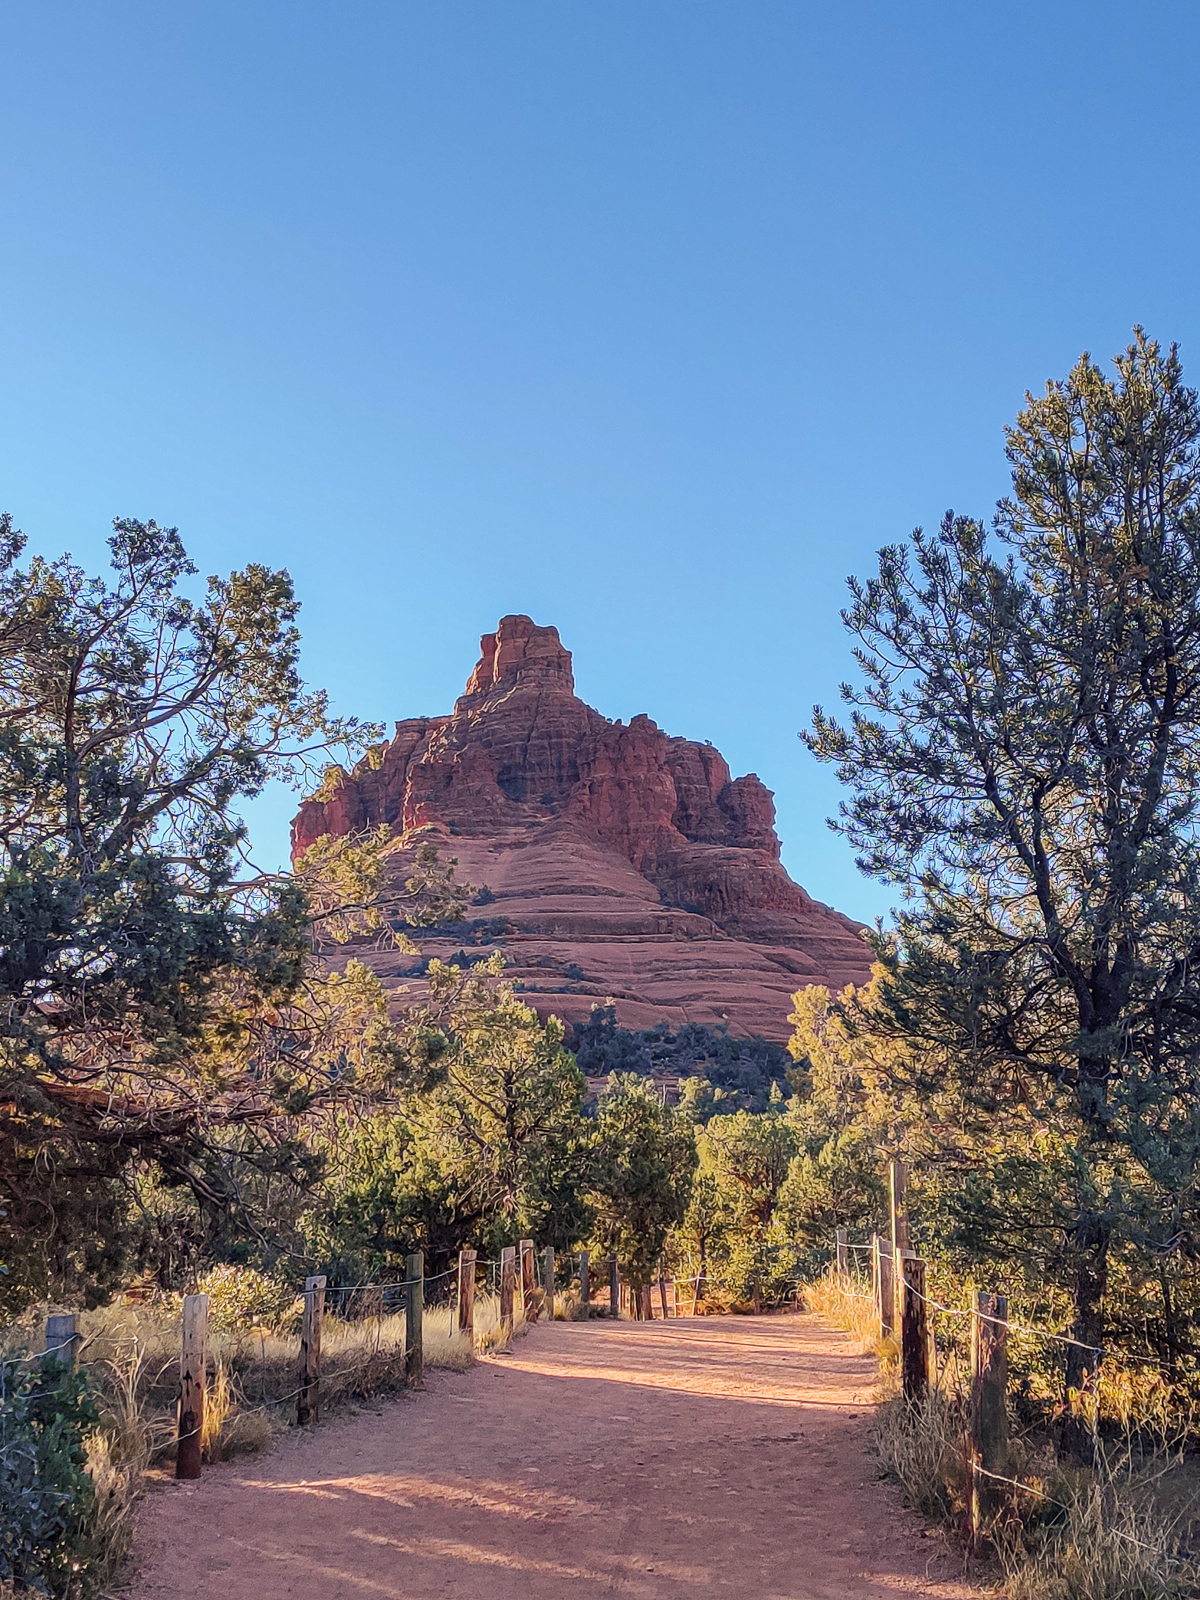 6 Iconic & Secret Sedona Vortex Hikes For All Levels bell rock